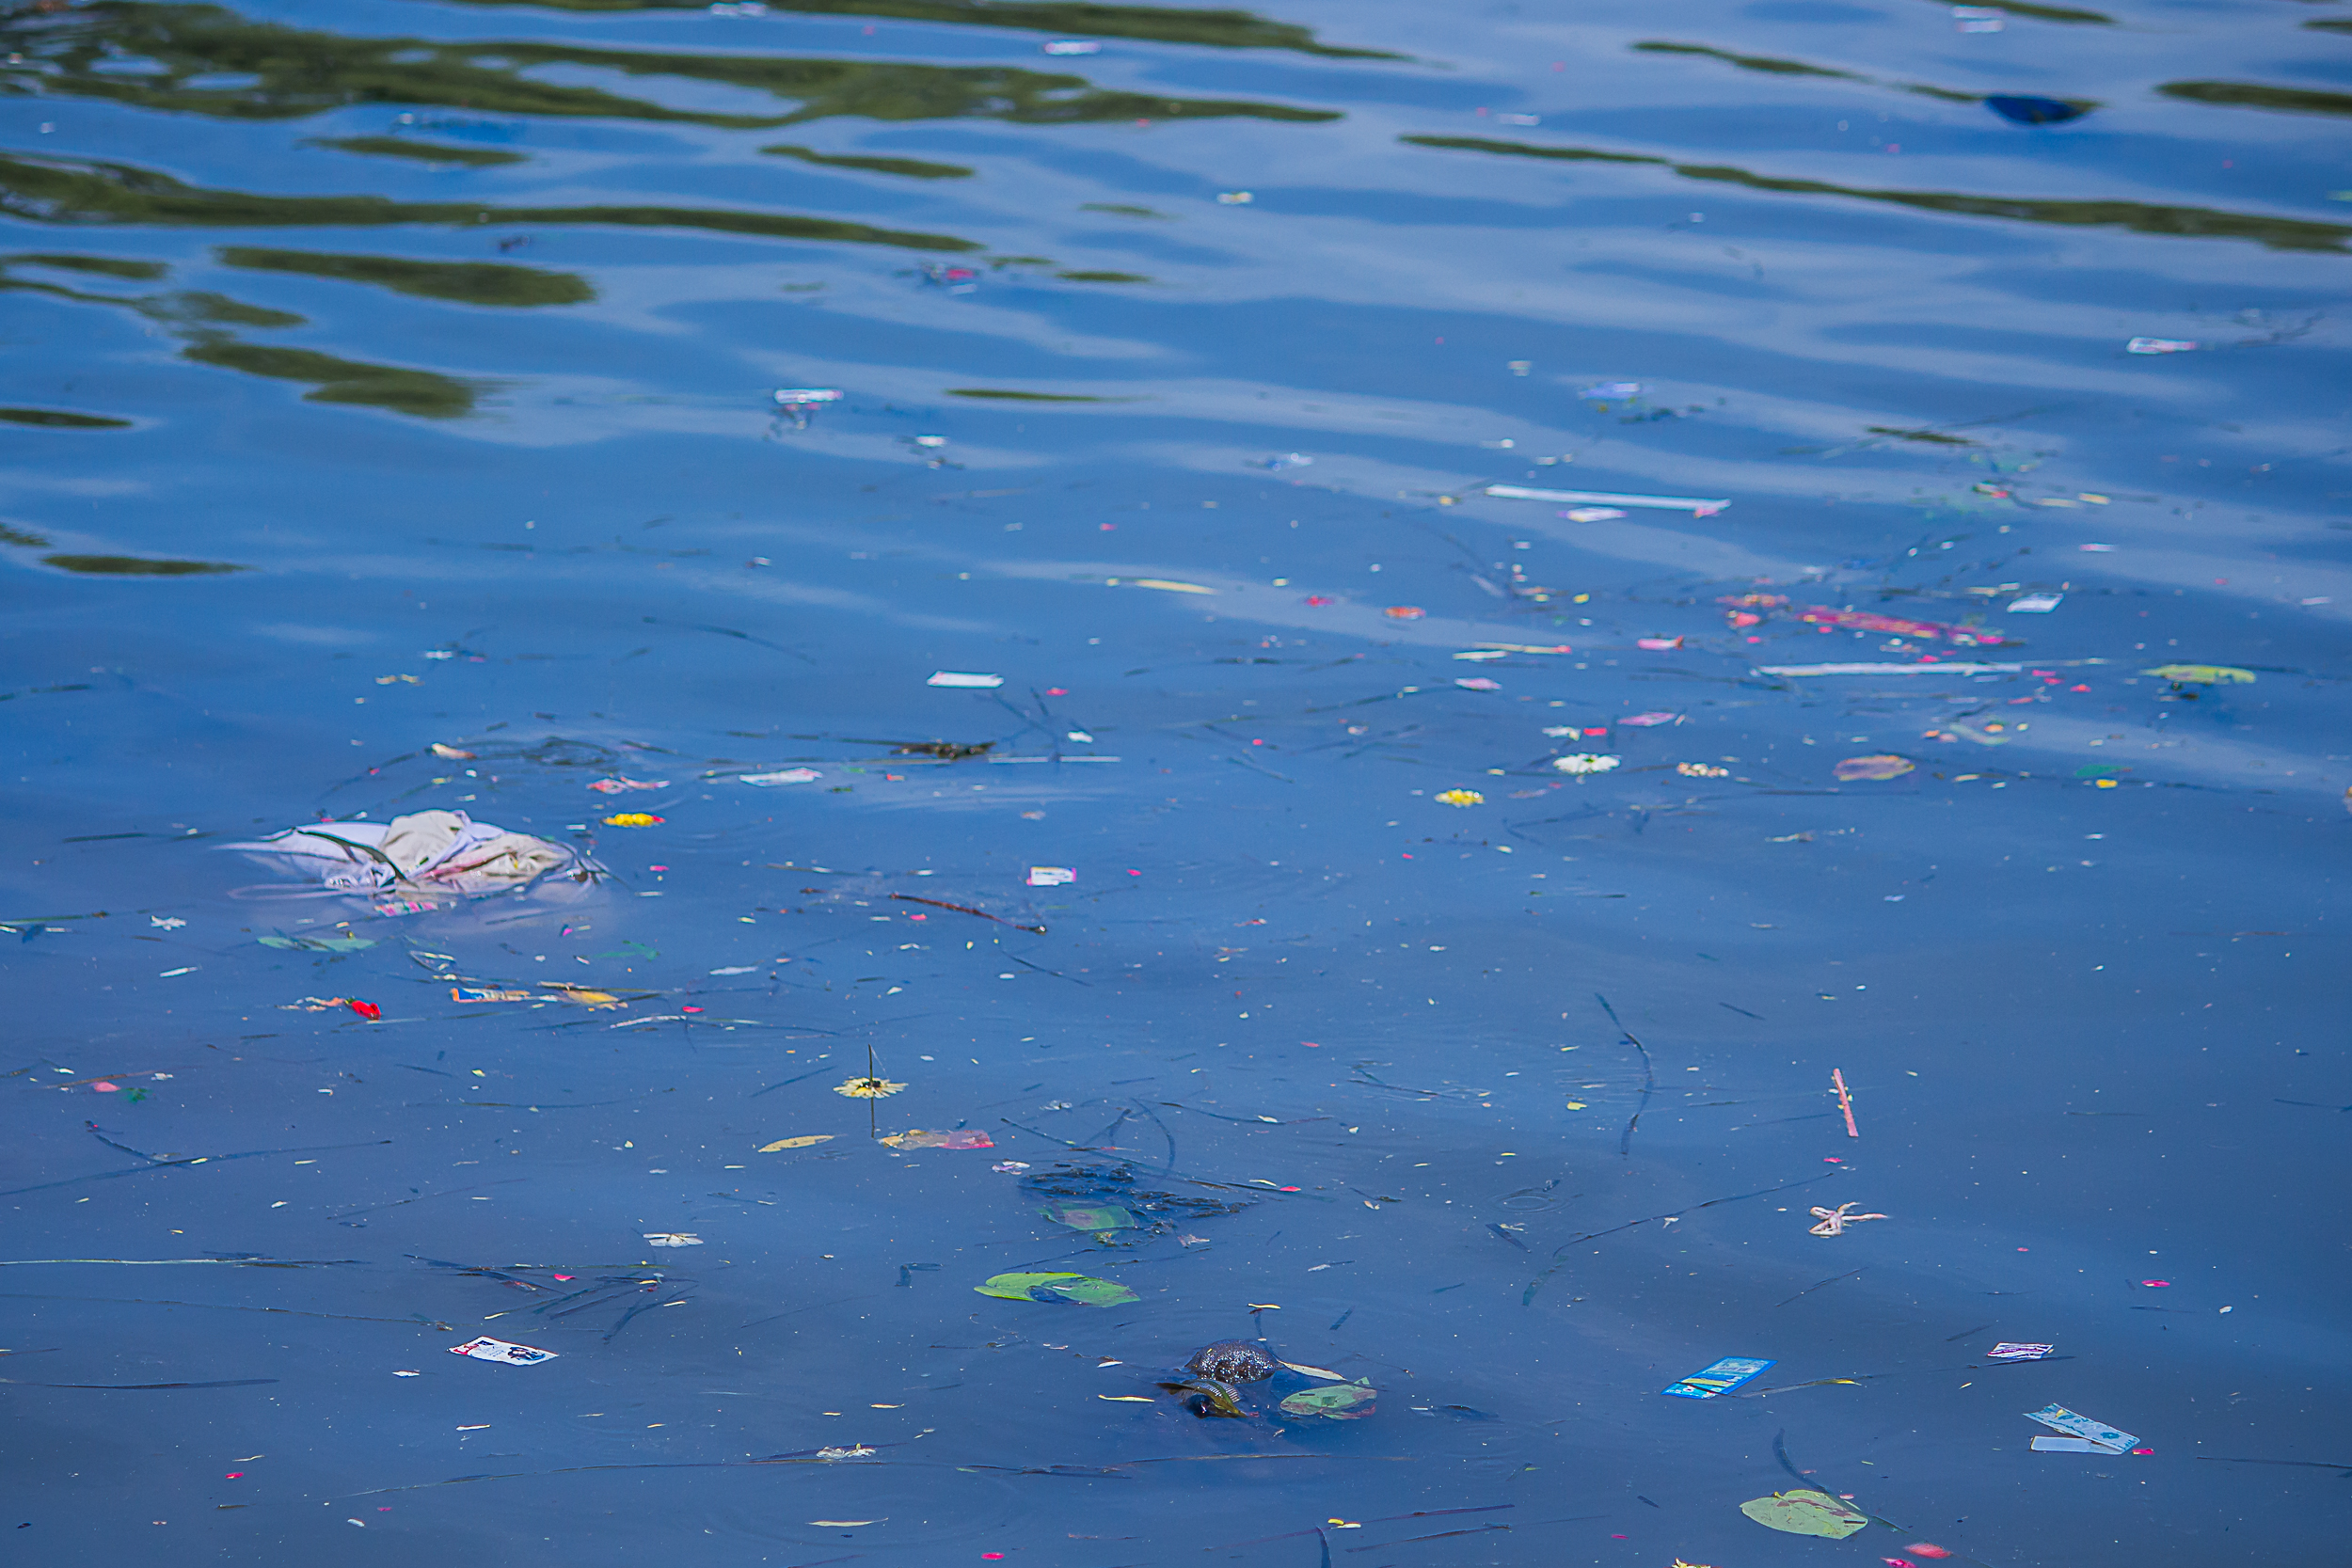 Waste material floating in river water